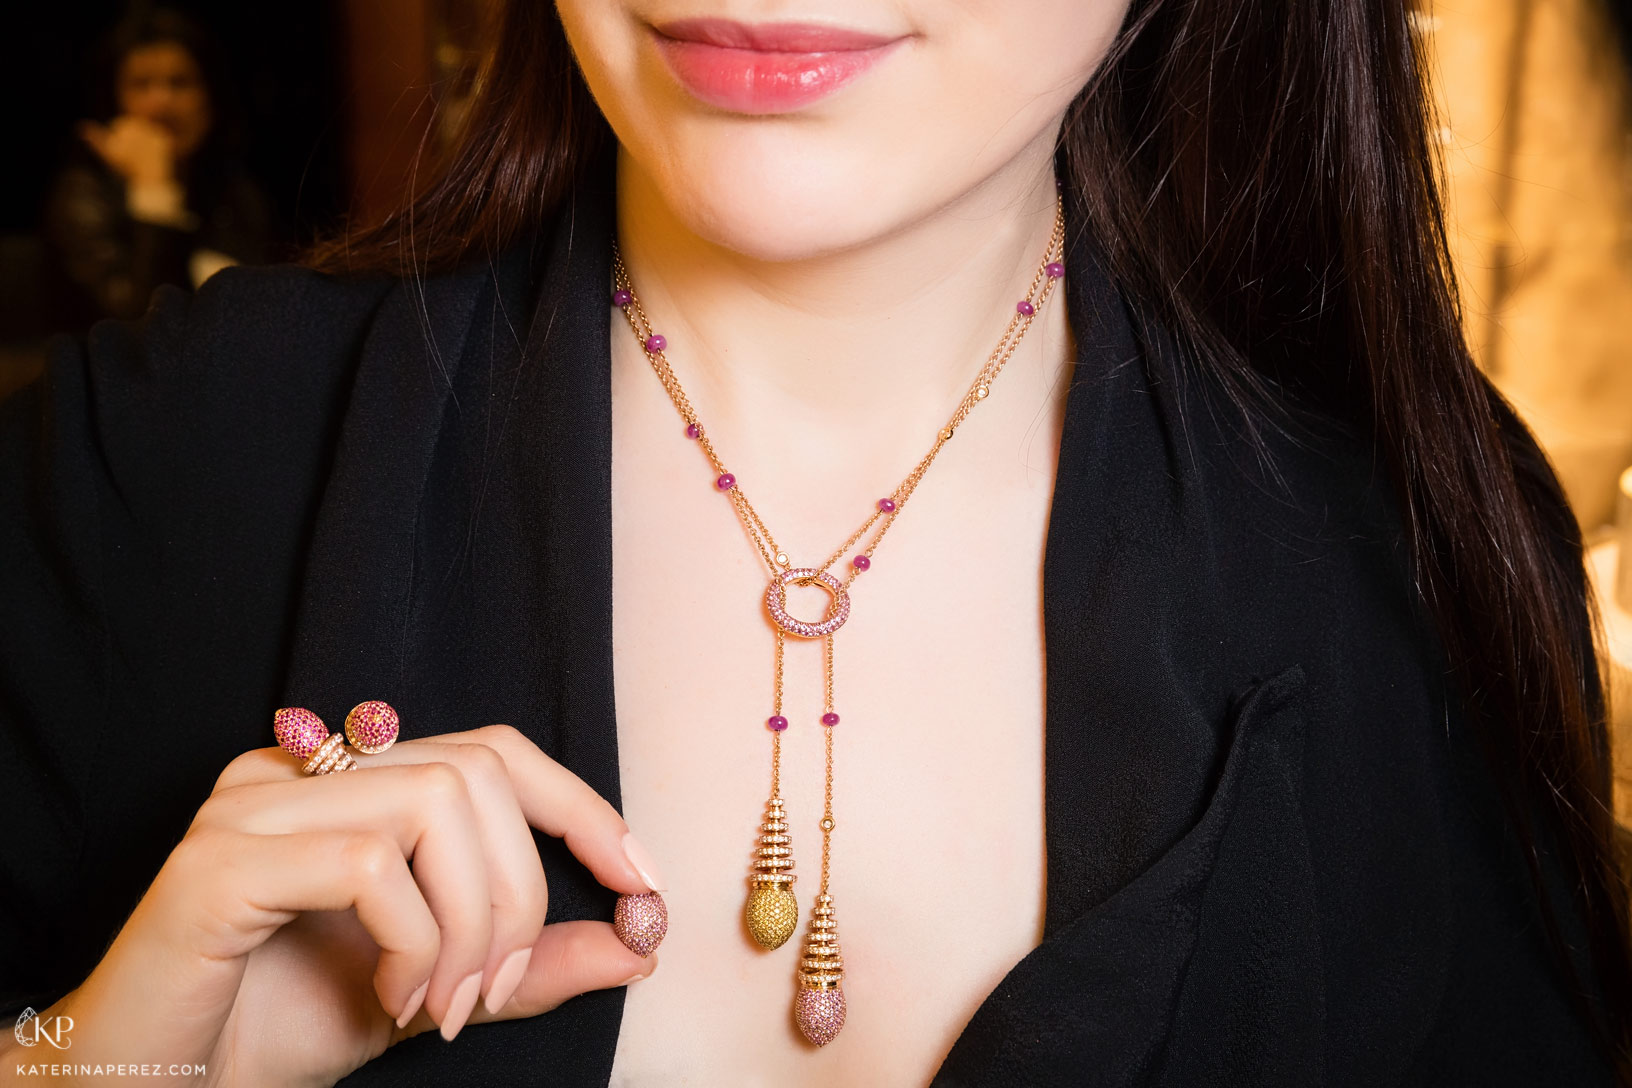 Avakian necklace with interchangeable drops